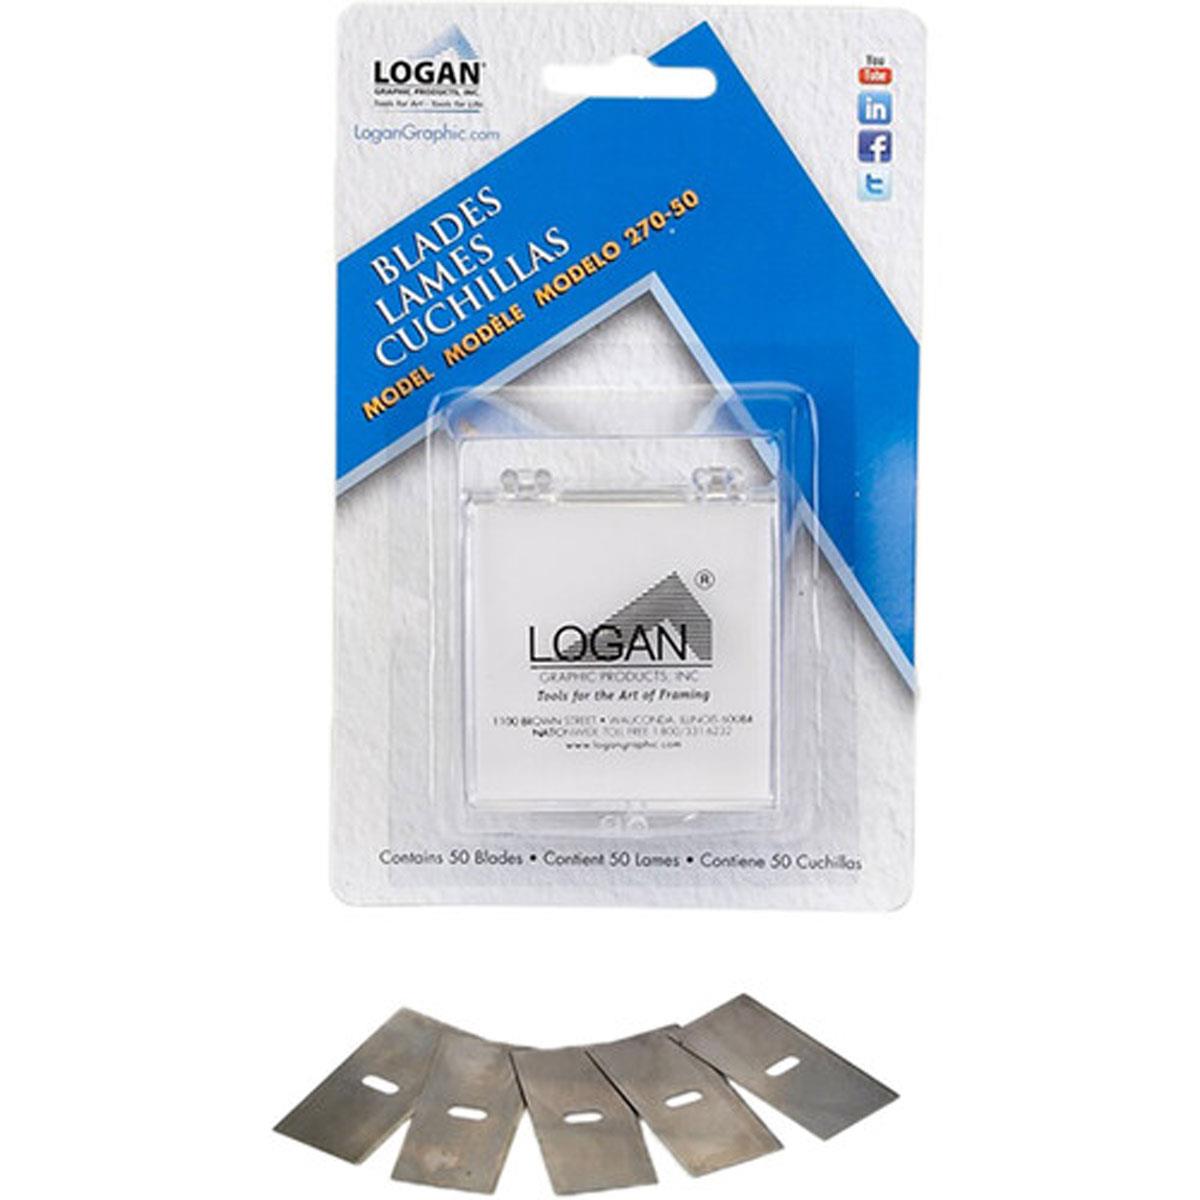 Image of Logan Graphics 270-50 Replacement Cutting Blades